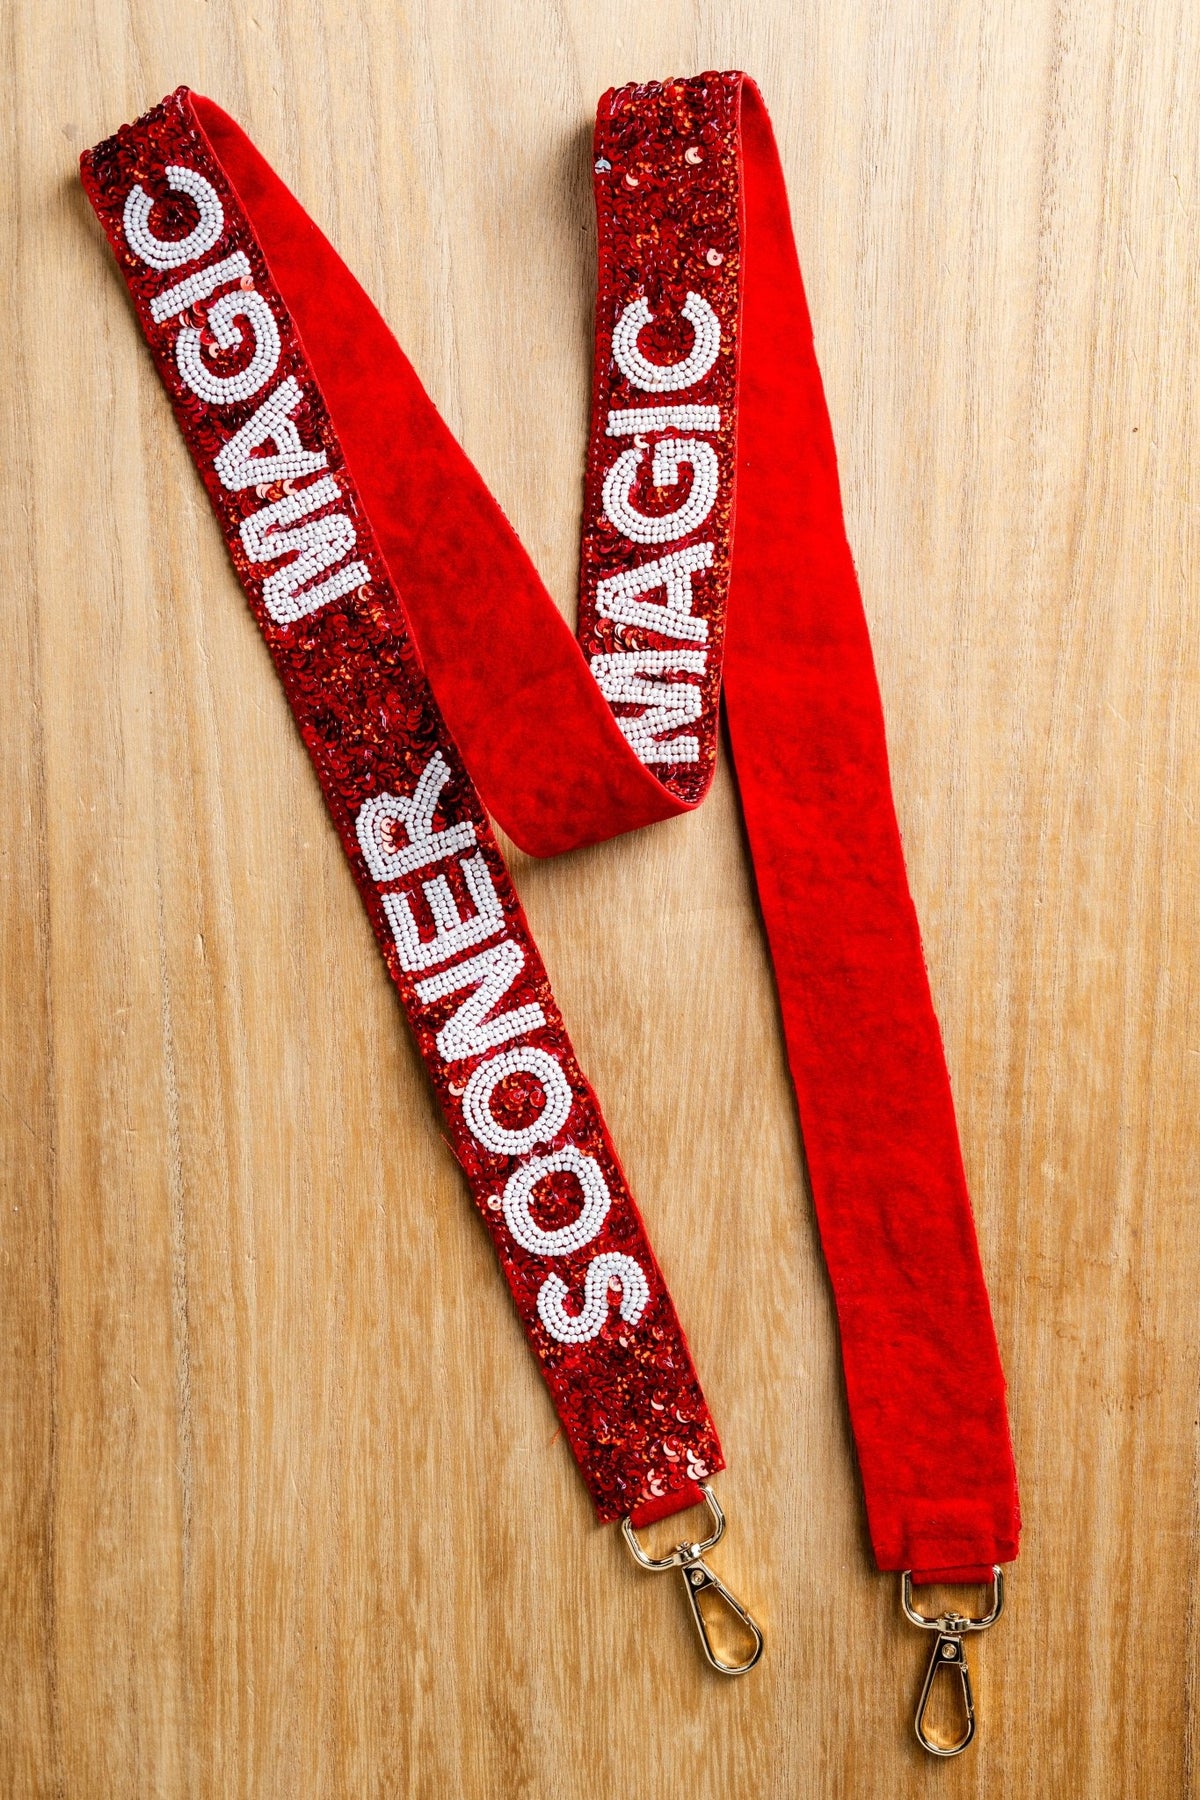 OU Boomer Sooner sequin beaded guitar strap crimson - Trendy Bags at Lush Fashion Lounge Boutique in Oklahoma City